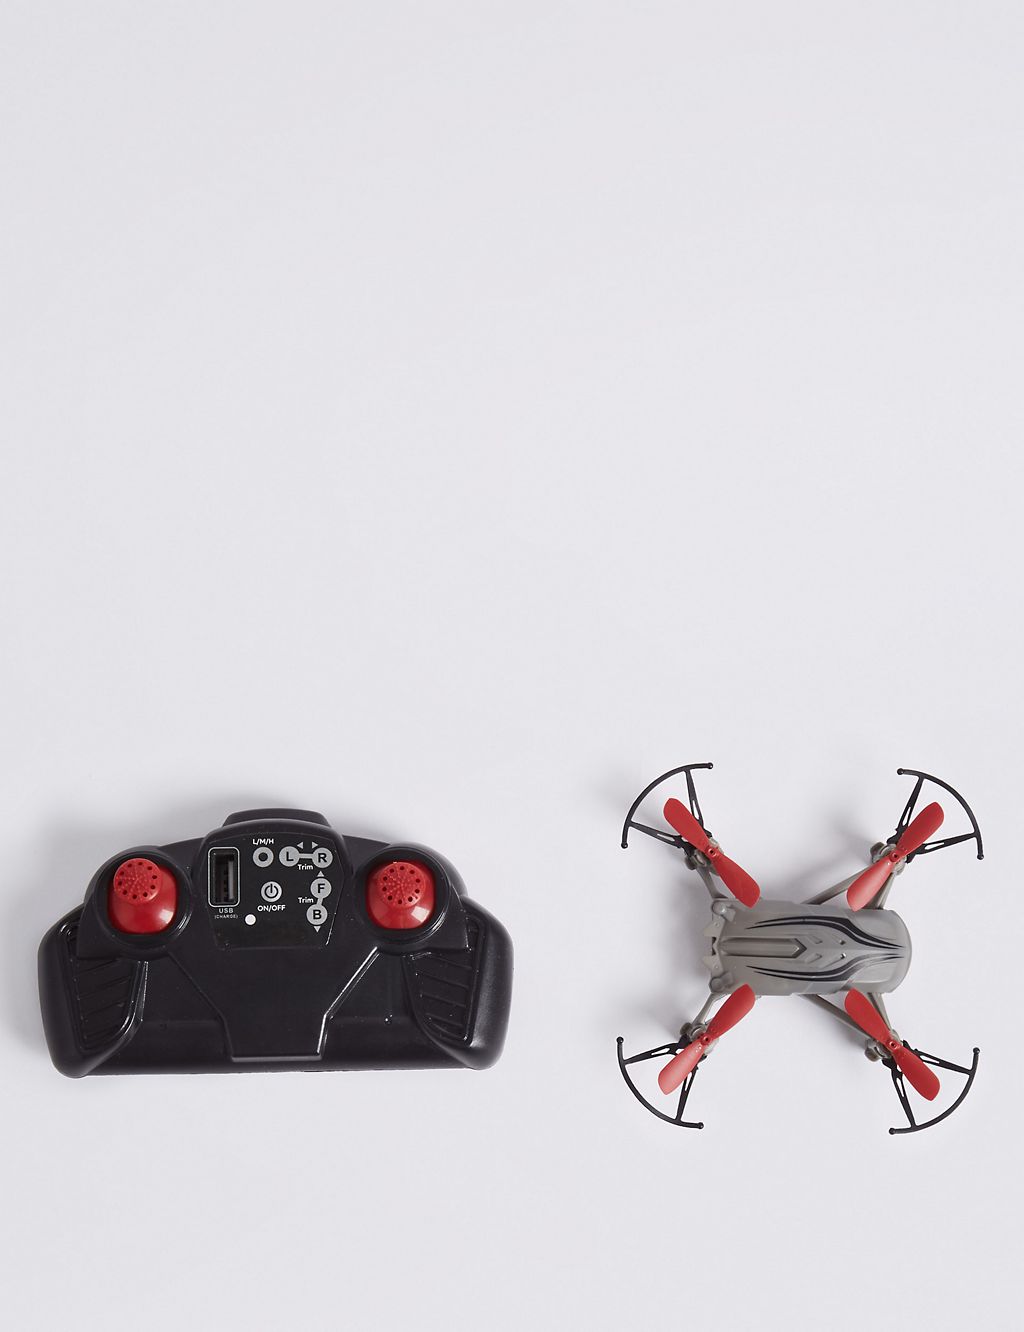 USB Drone 5 of 6